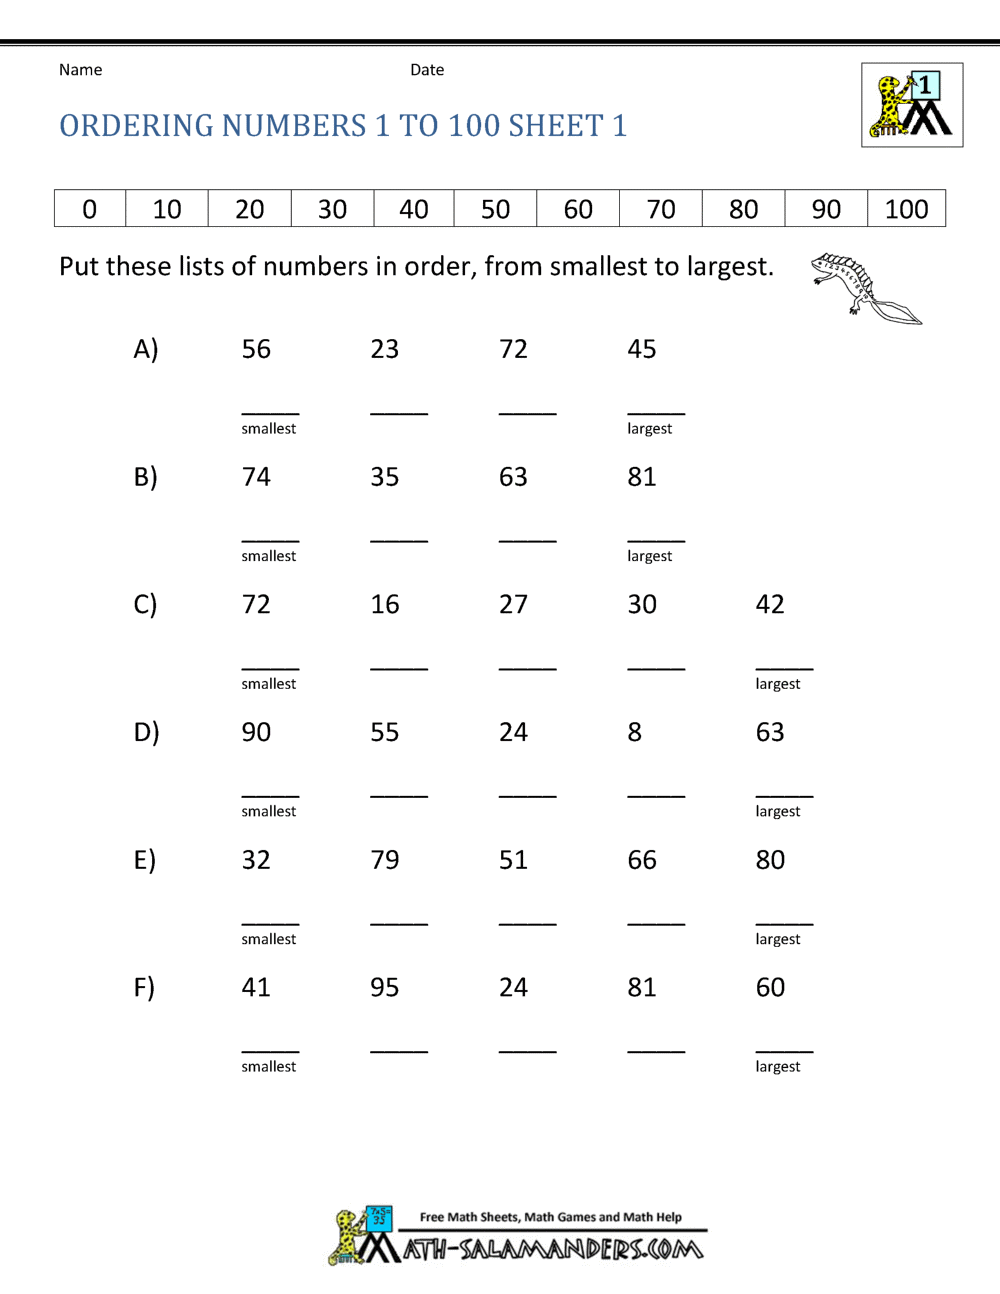 Basic Math Worksheets - Ordering Numbers to 100